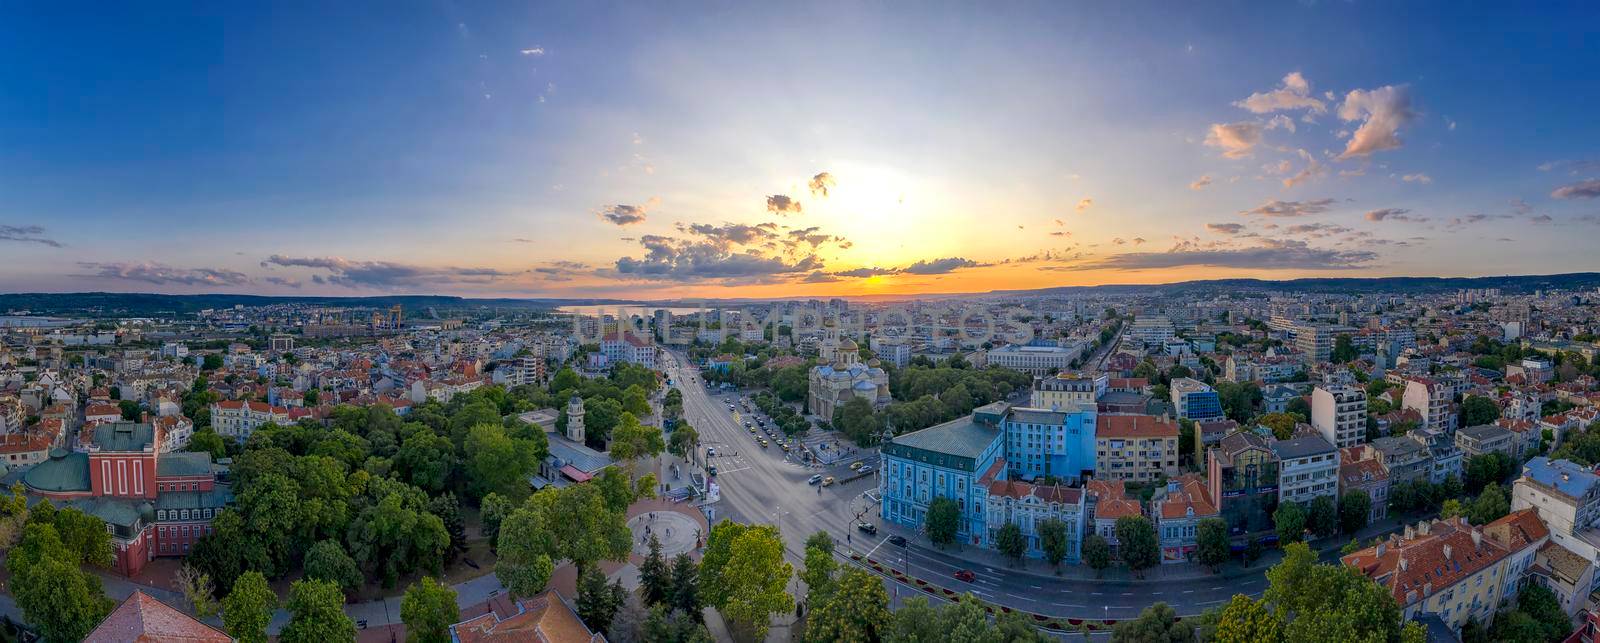 Varna, Bulgaria - July 12, 2019; Aerial view from the drone of the magnificent sunset over centrum of Varna city, Bulgaria